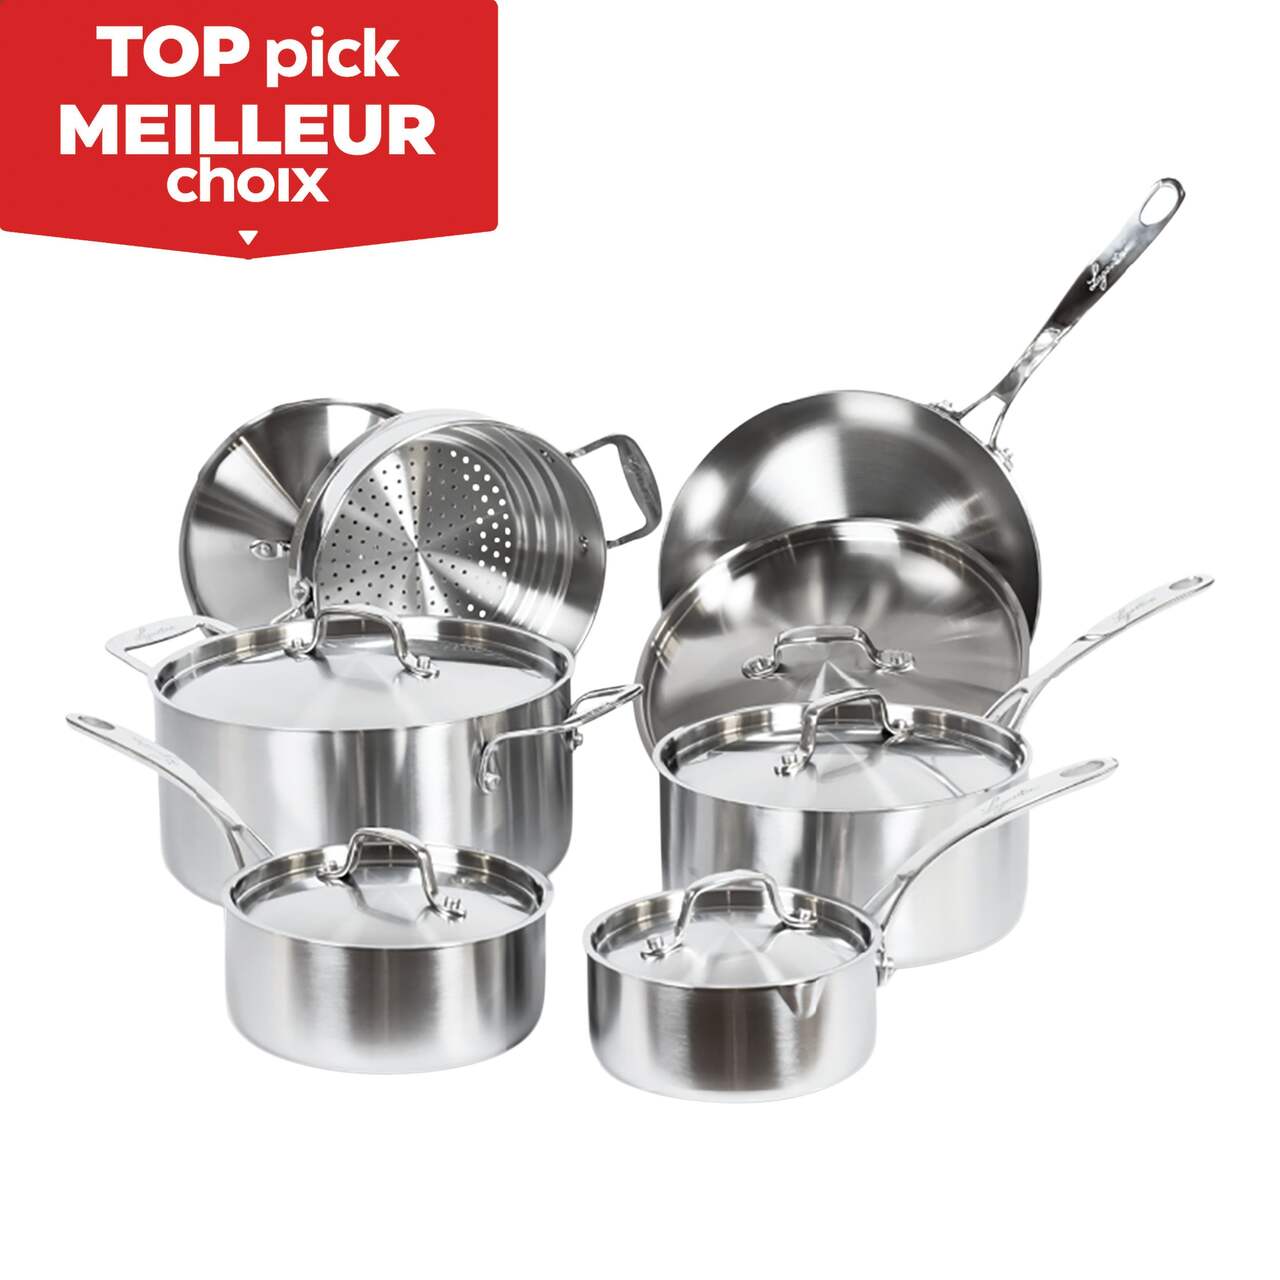 https://media-www.canadiantire.ca/product/living/kitchen/cookware/1422407/lagostina-12pc-set-3ply-clad-8d0013c1-9349-4c08-bd1d-f88e2b4e34d4-jpgrendition.jpg?imdensity=1&imwidth=640&impolicy=mZoom